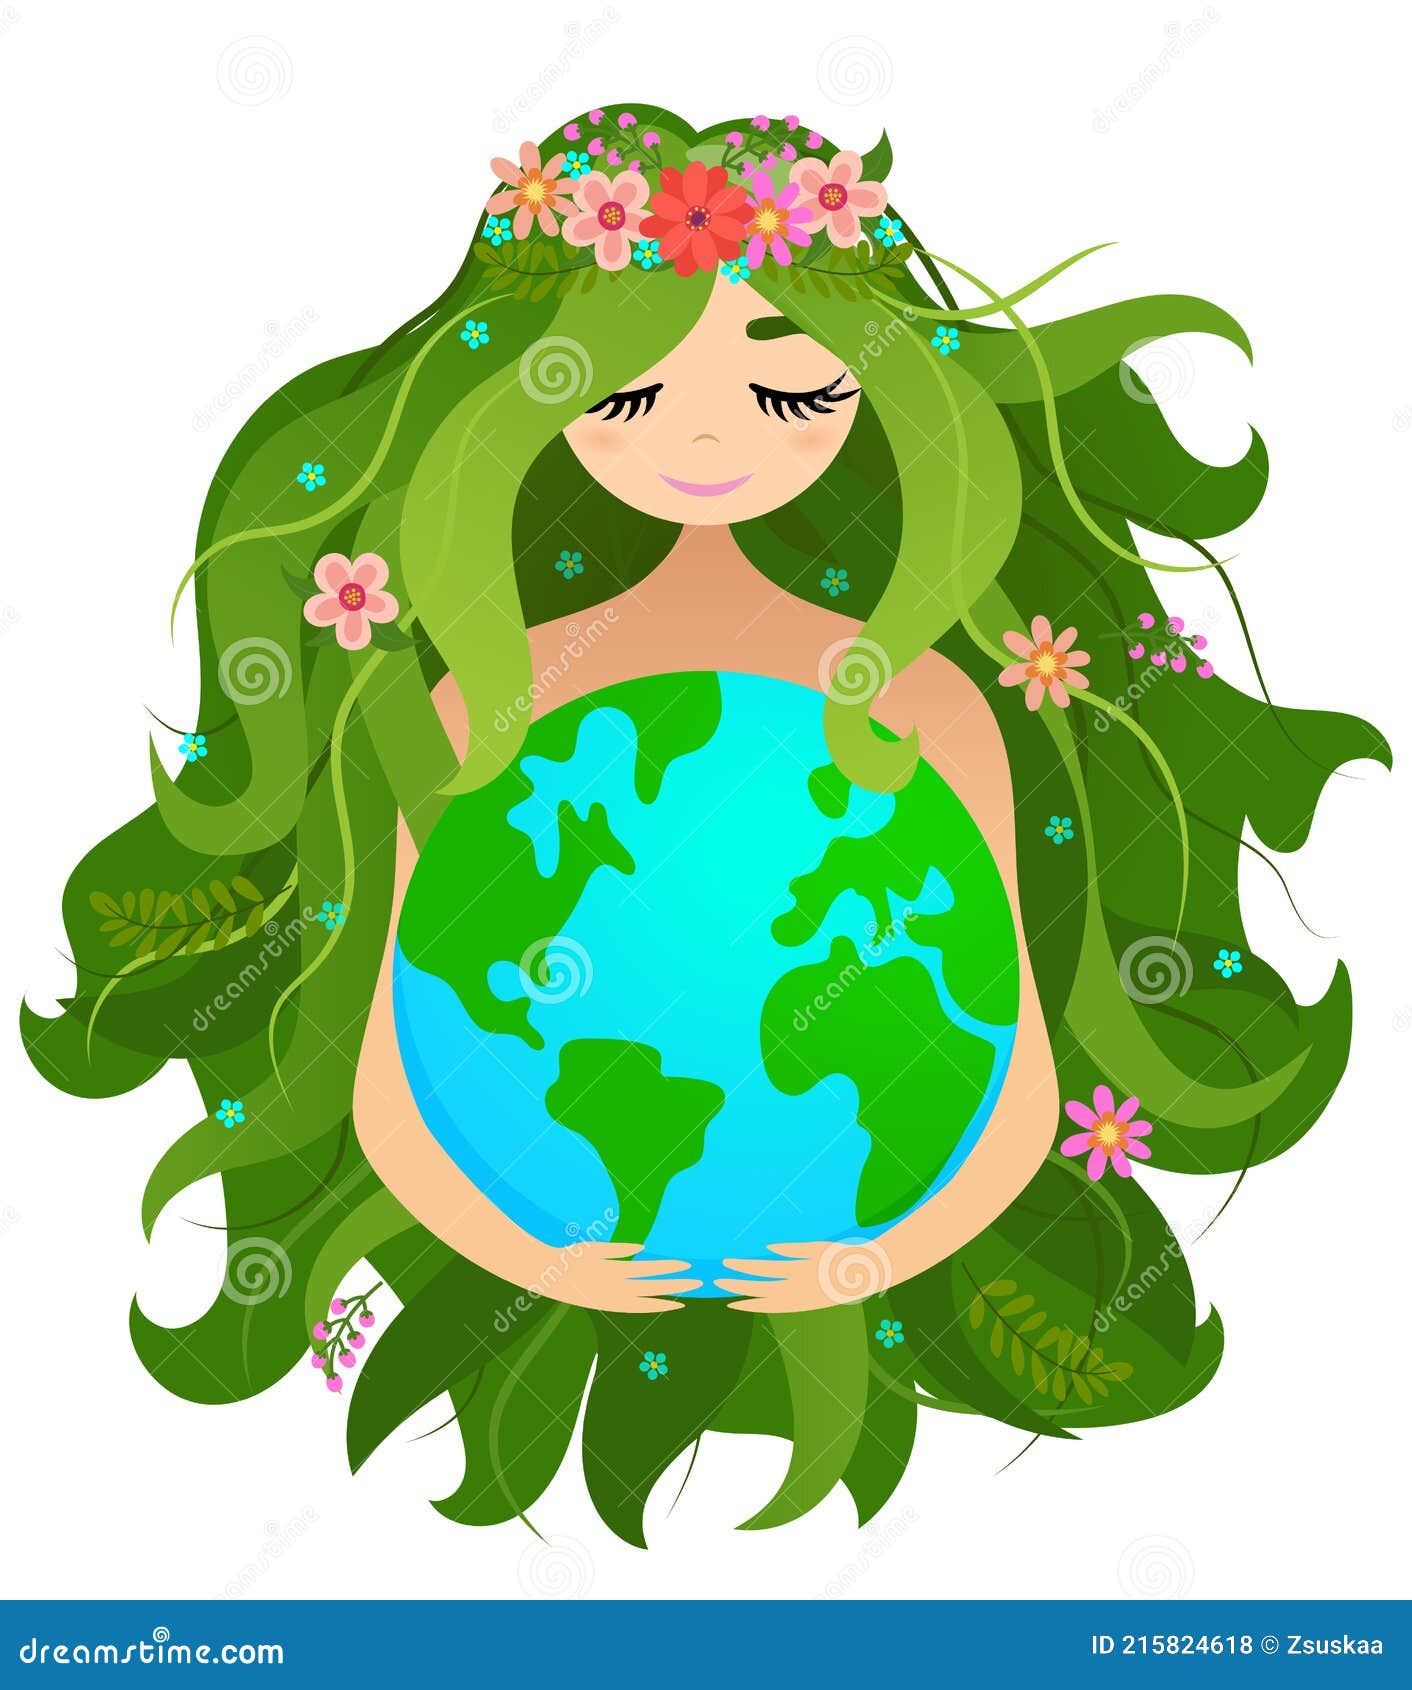 Drawing on Earth Day | Curious Times-suu.vn